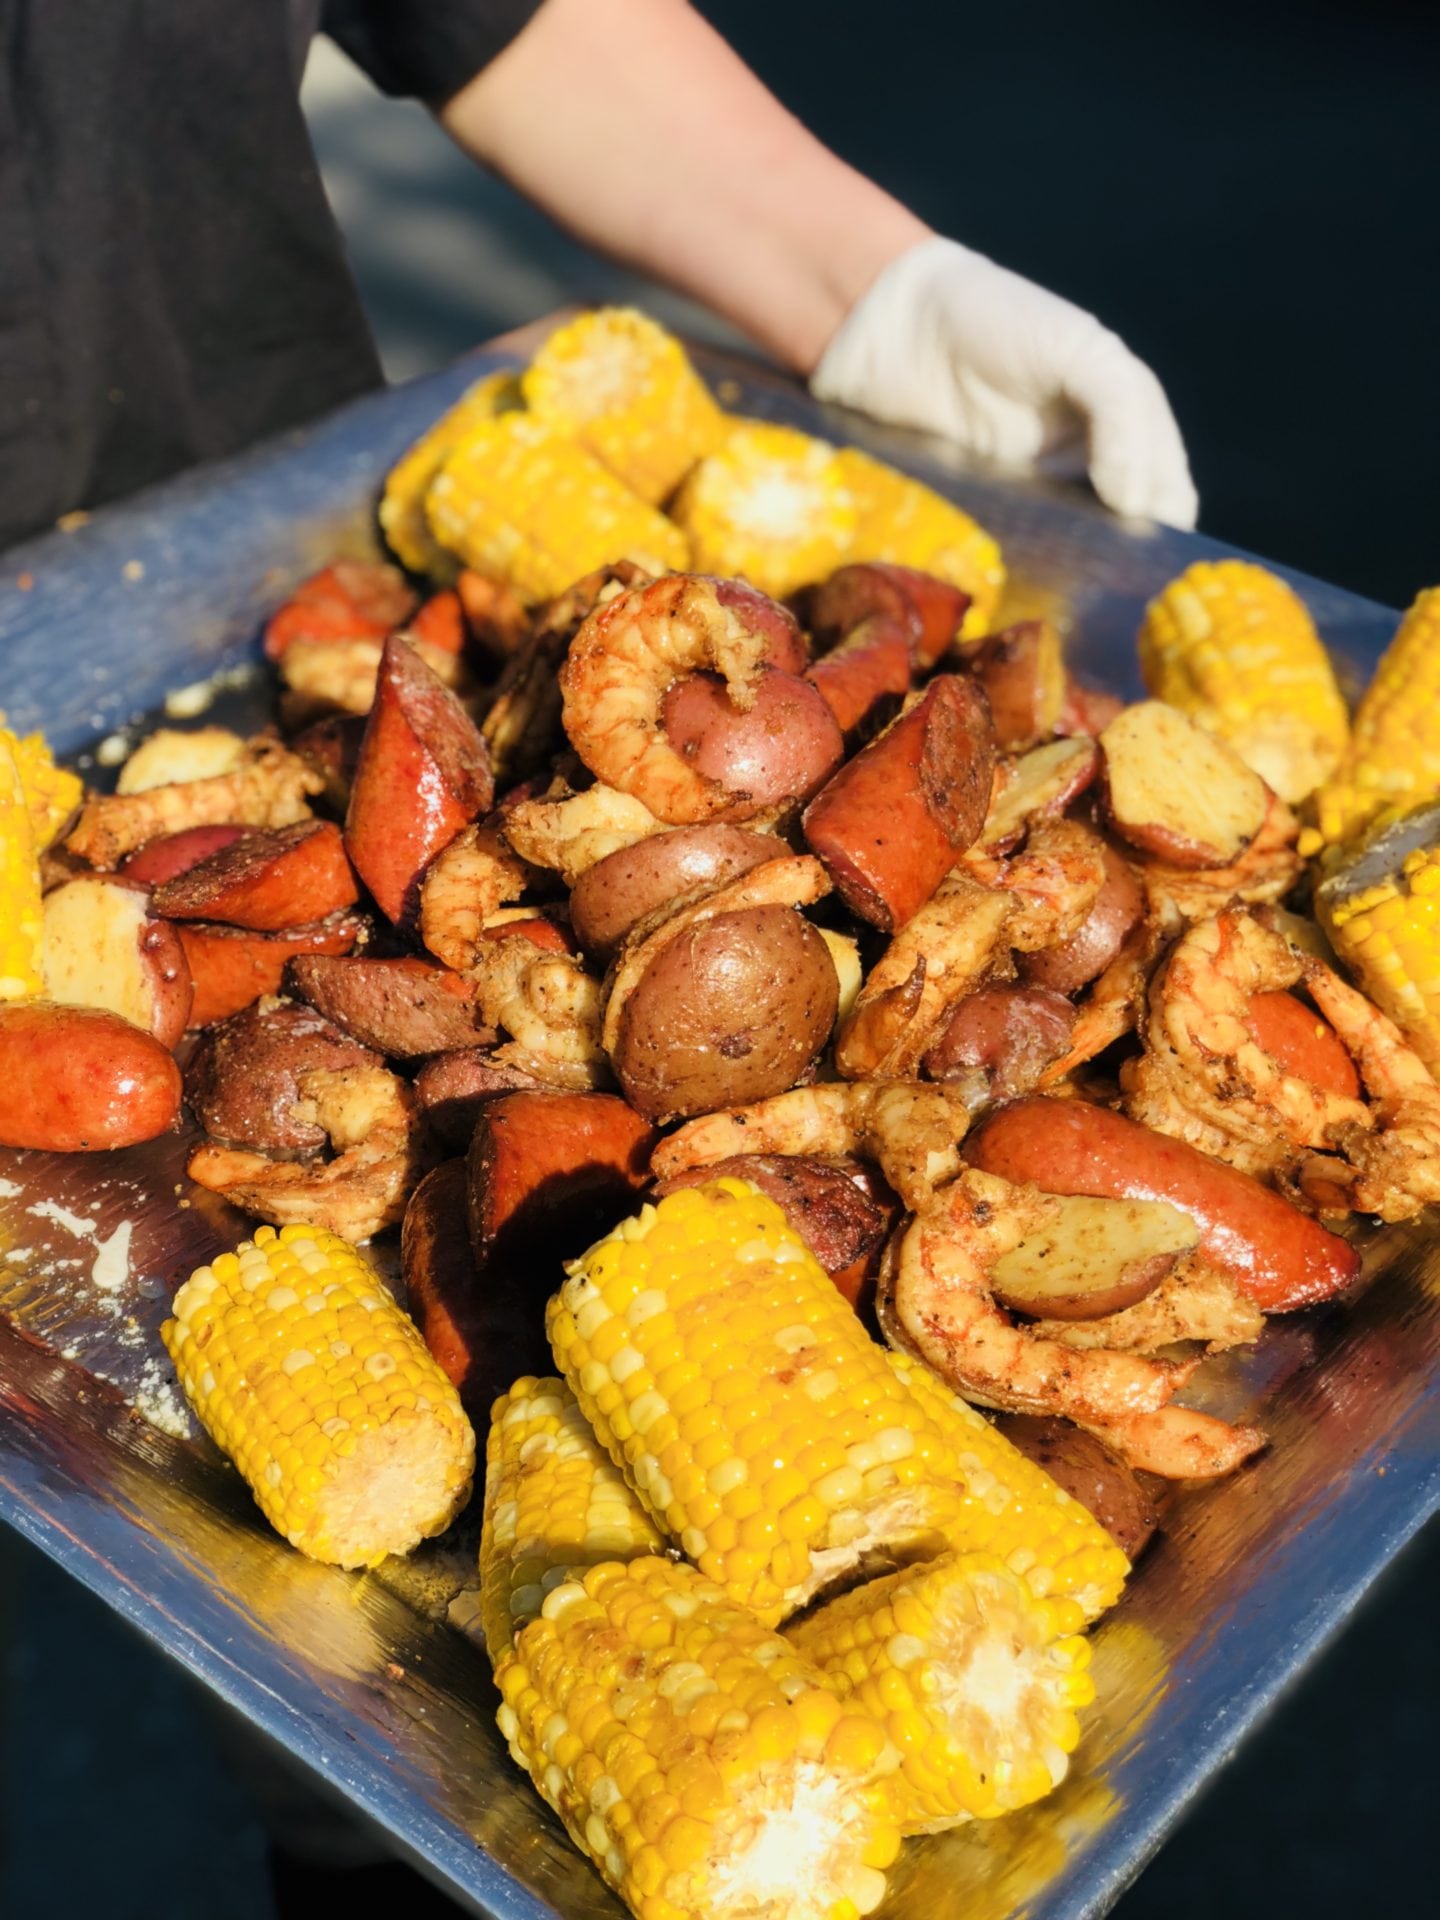 A plate of food with shrimp, corn and sausage.